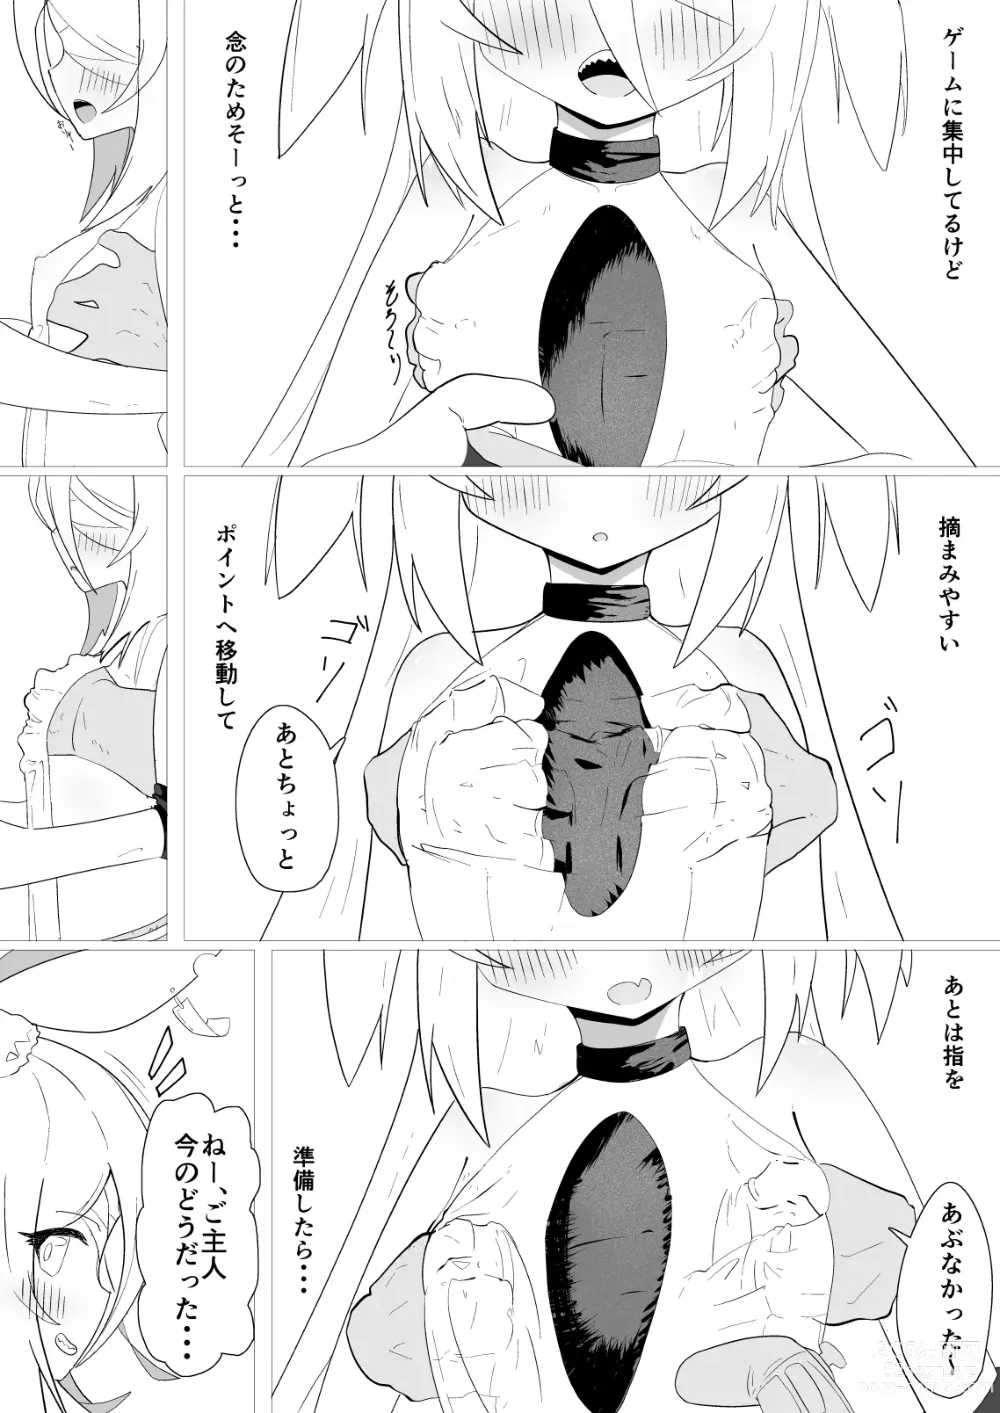 Page 7 of doujinshi 隅々四隅s illustrations - pixiv